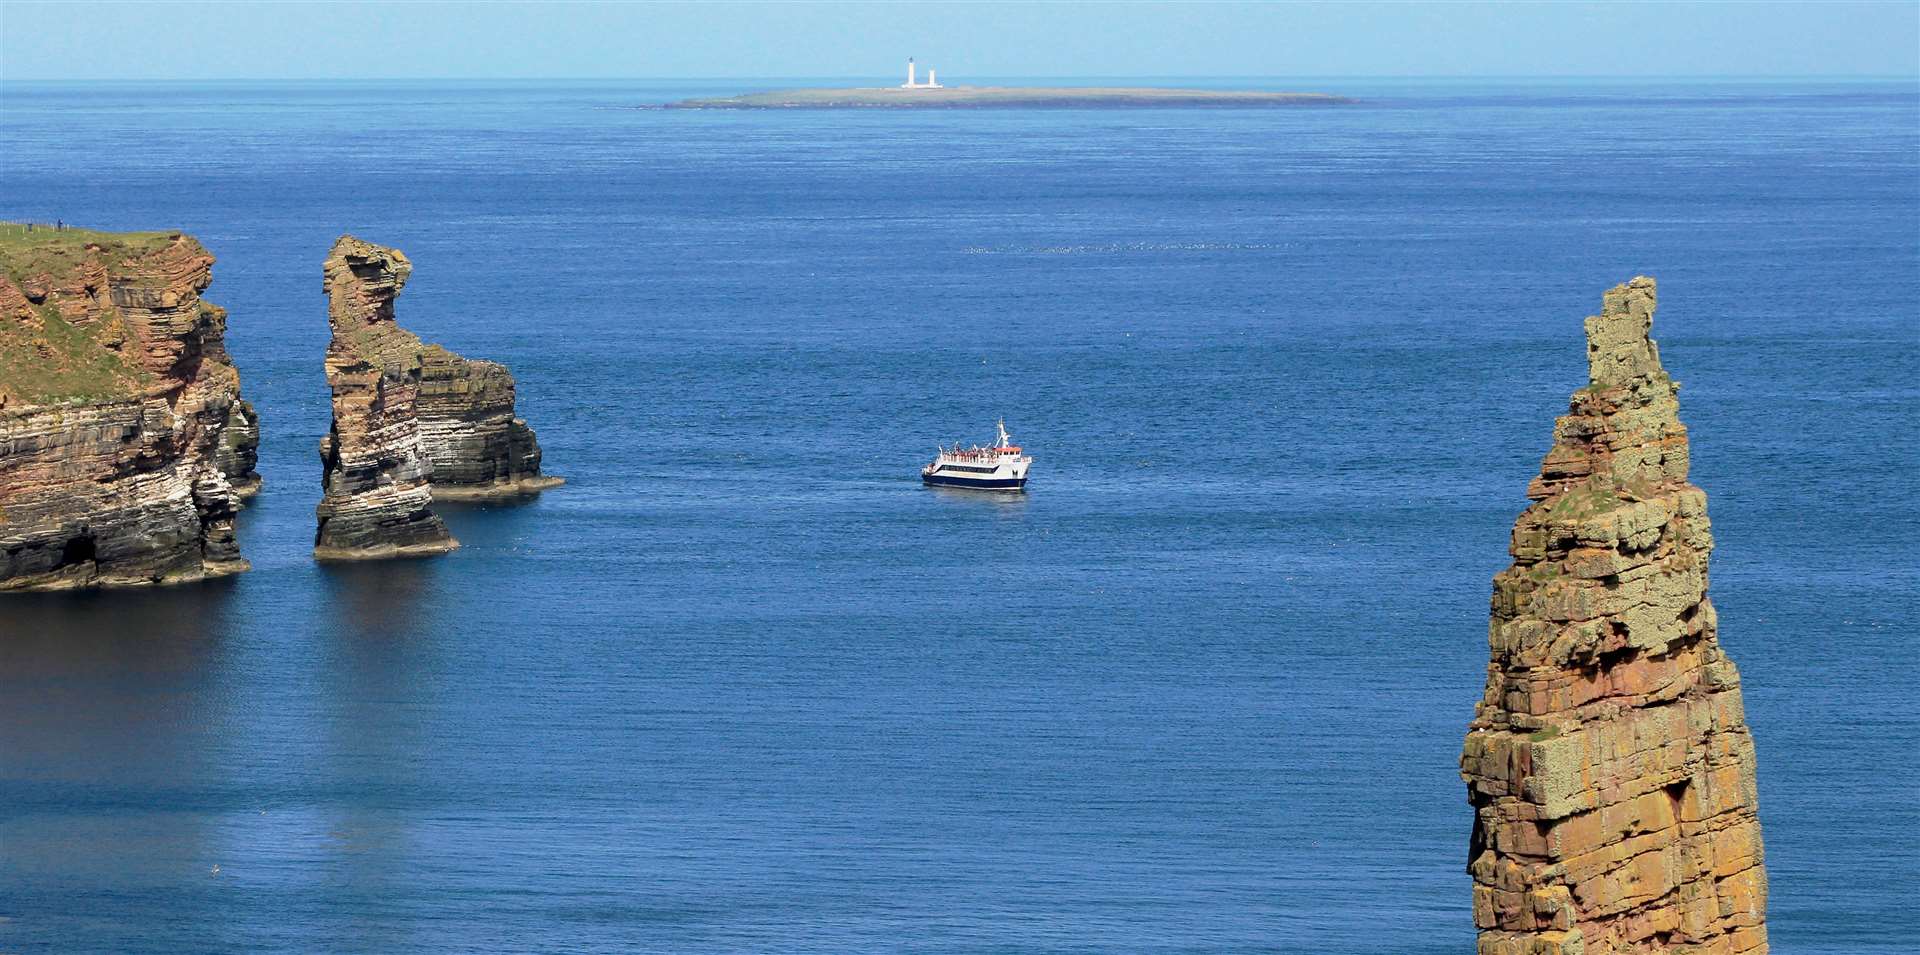 The Pentland Venture on a wildlife cruise around Duncansby Head this summer. Picture: Alan Hendry